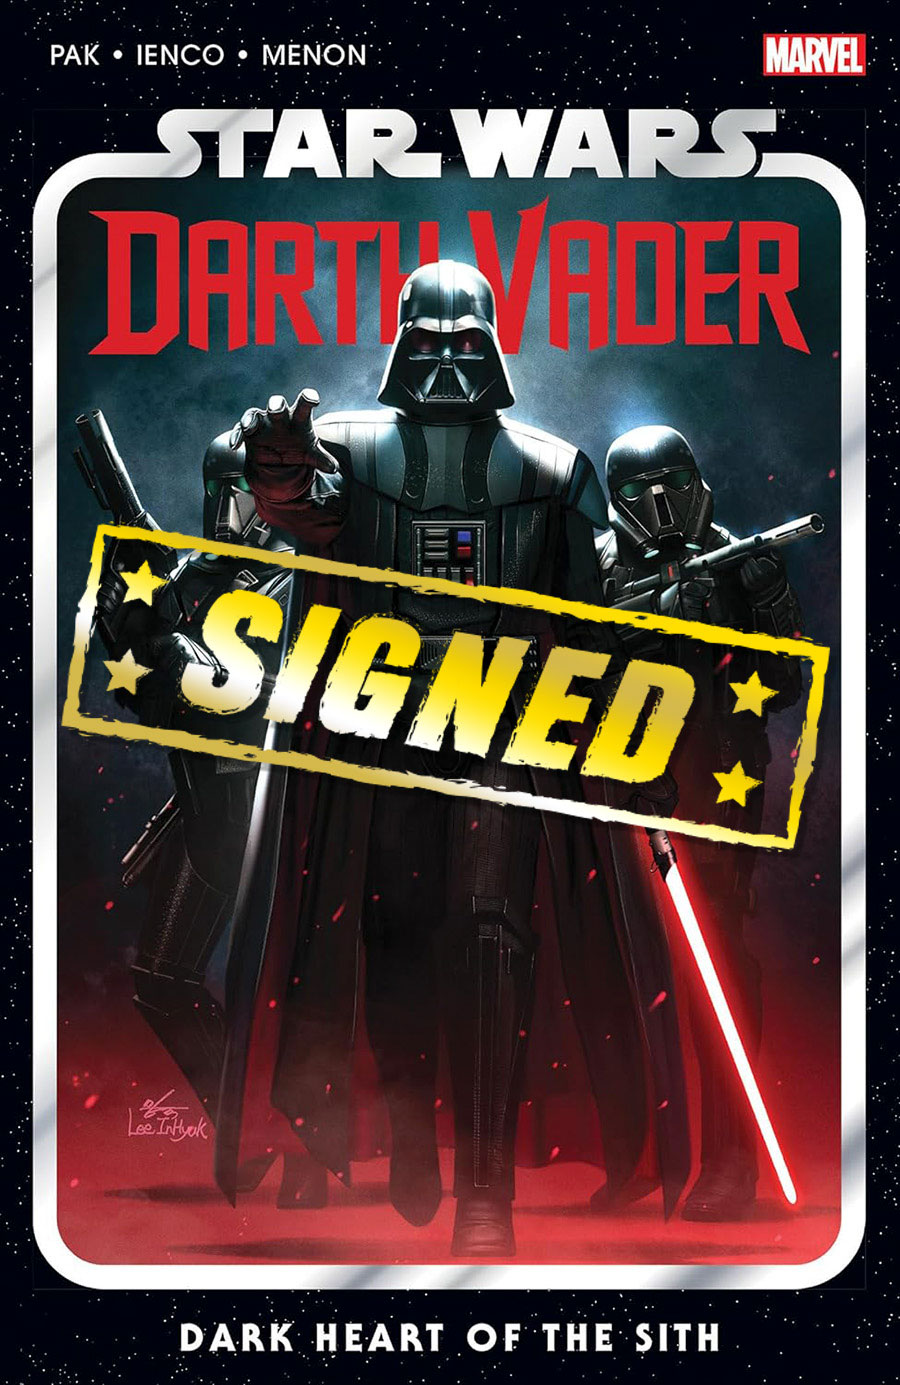 Star Wars Darth Vader By Greg Pak Vol 1 Dark Heart Of The Sith TP Signed By Greg Pak